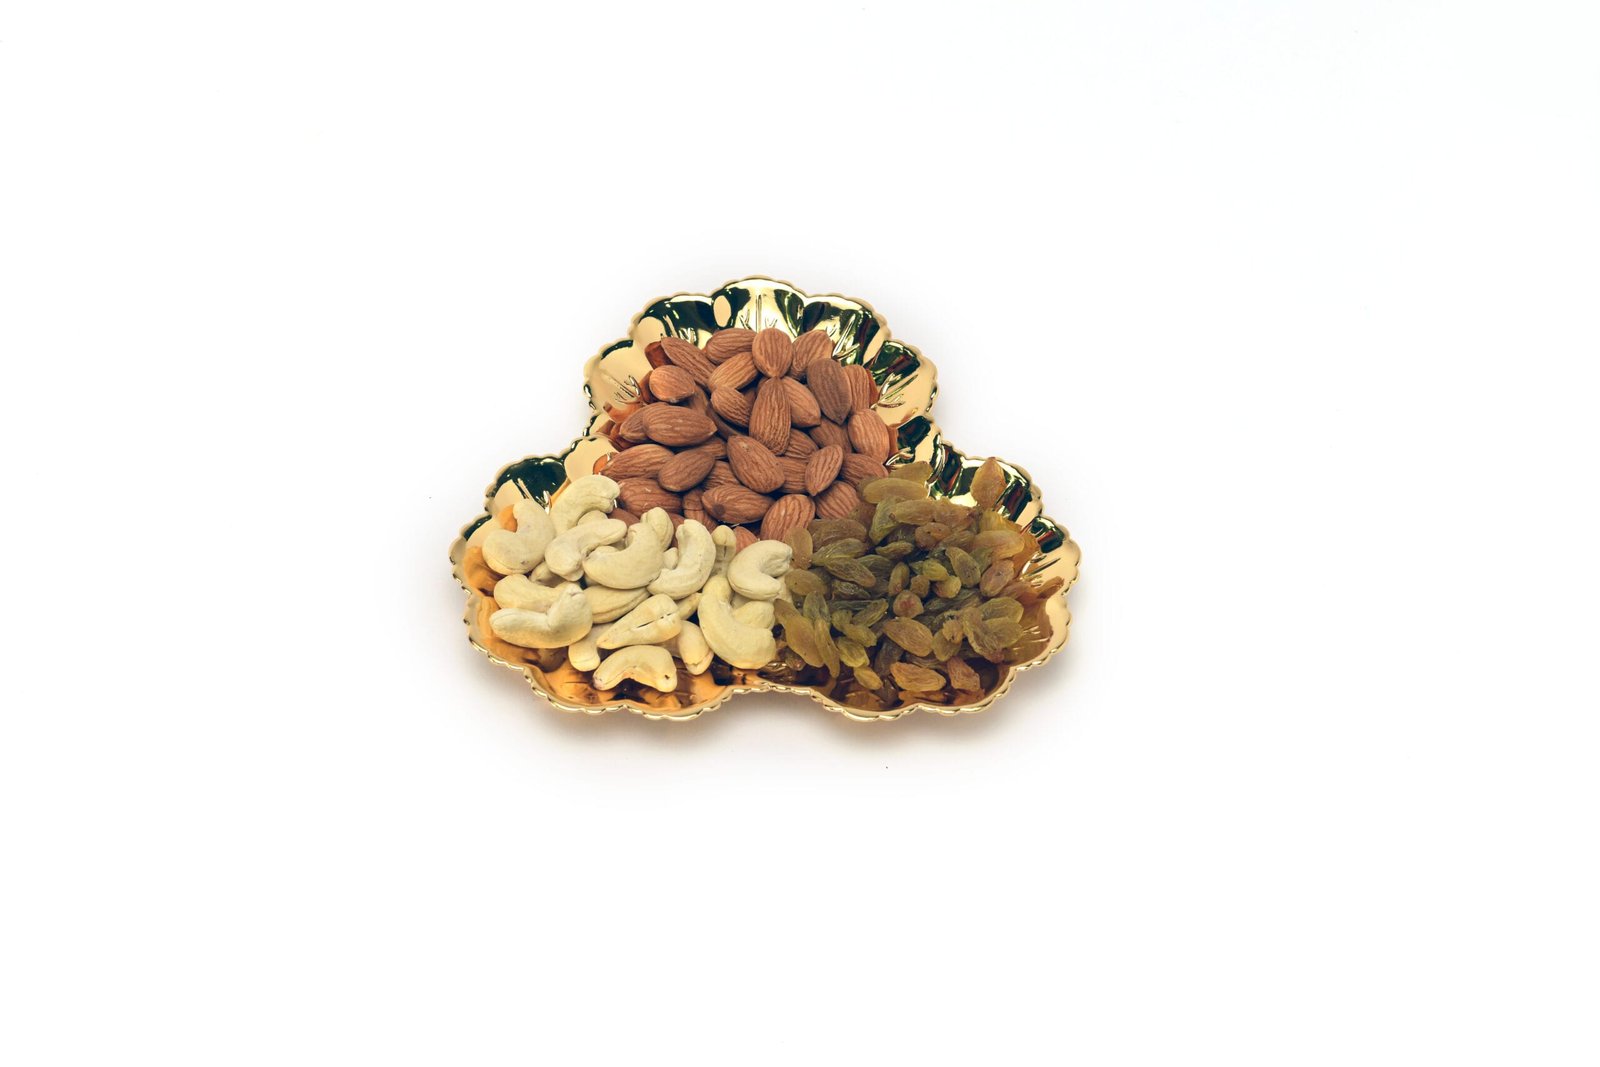 three sided silver platters with dryfruit